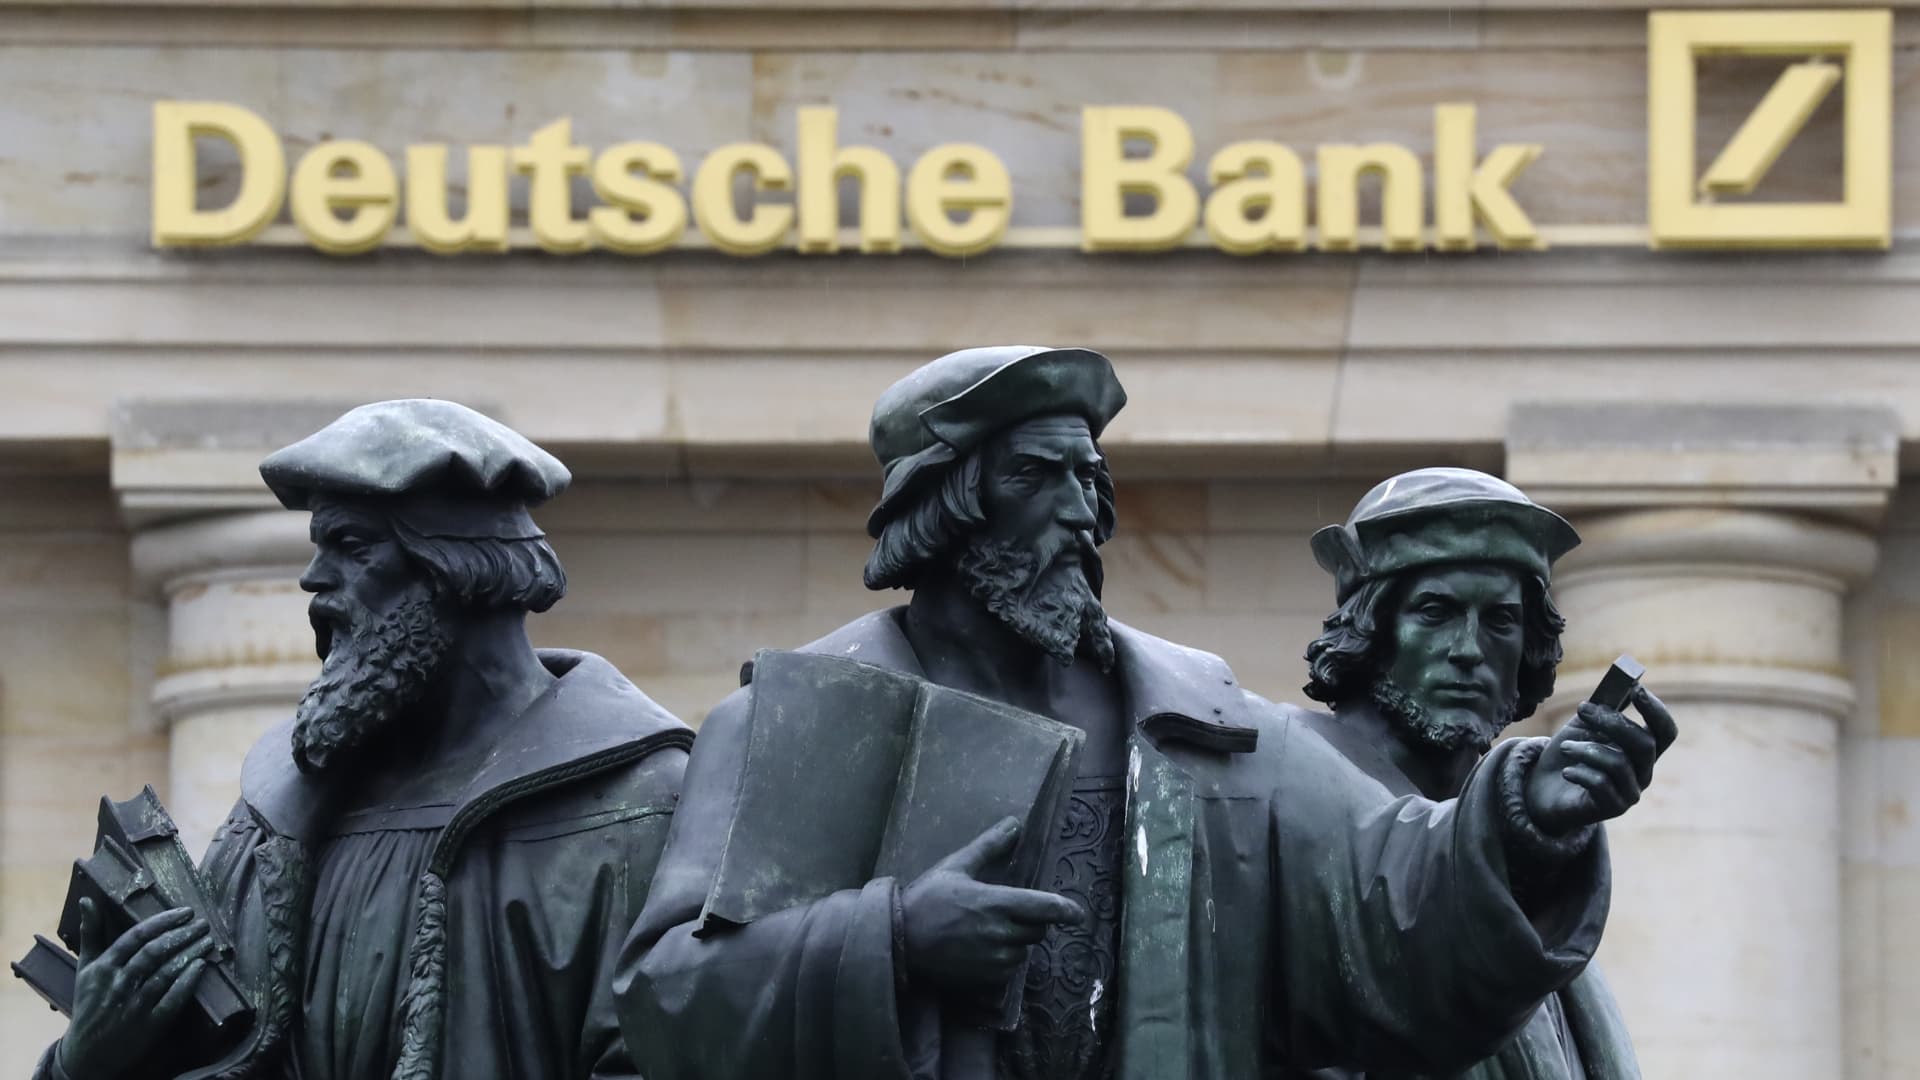 Deutsche Bank smashes profit expectations in fourth quarter as higher interest rates bolster revenue